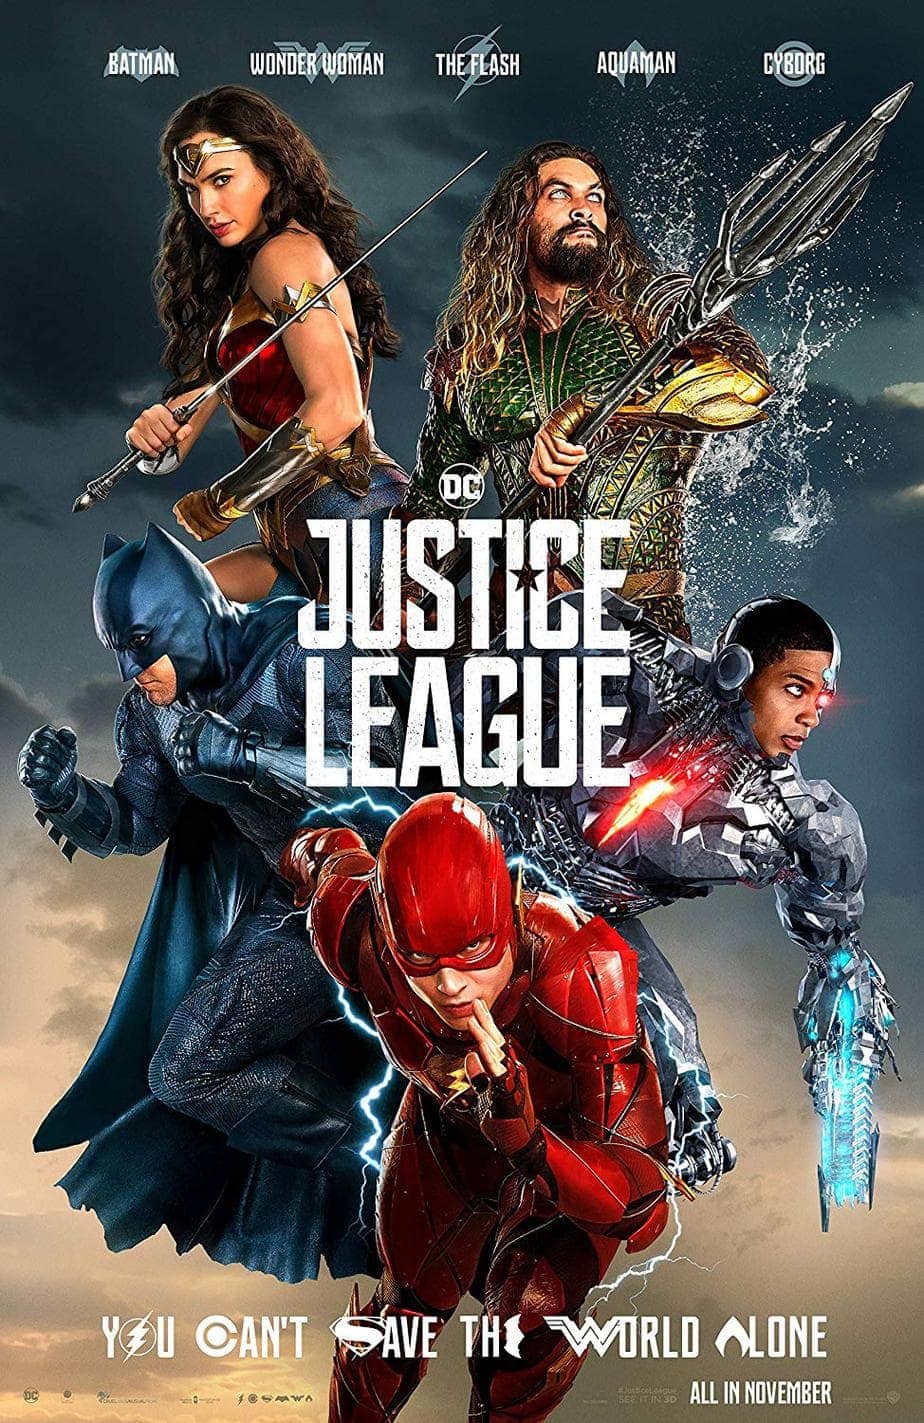 After a Day Uploaded Justice League Trailer Surpassed 11 Million View at YouTube 10